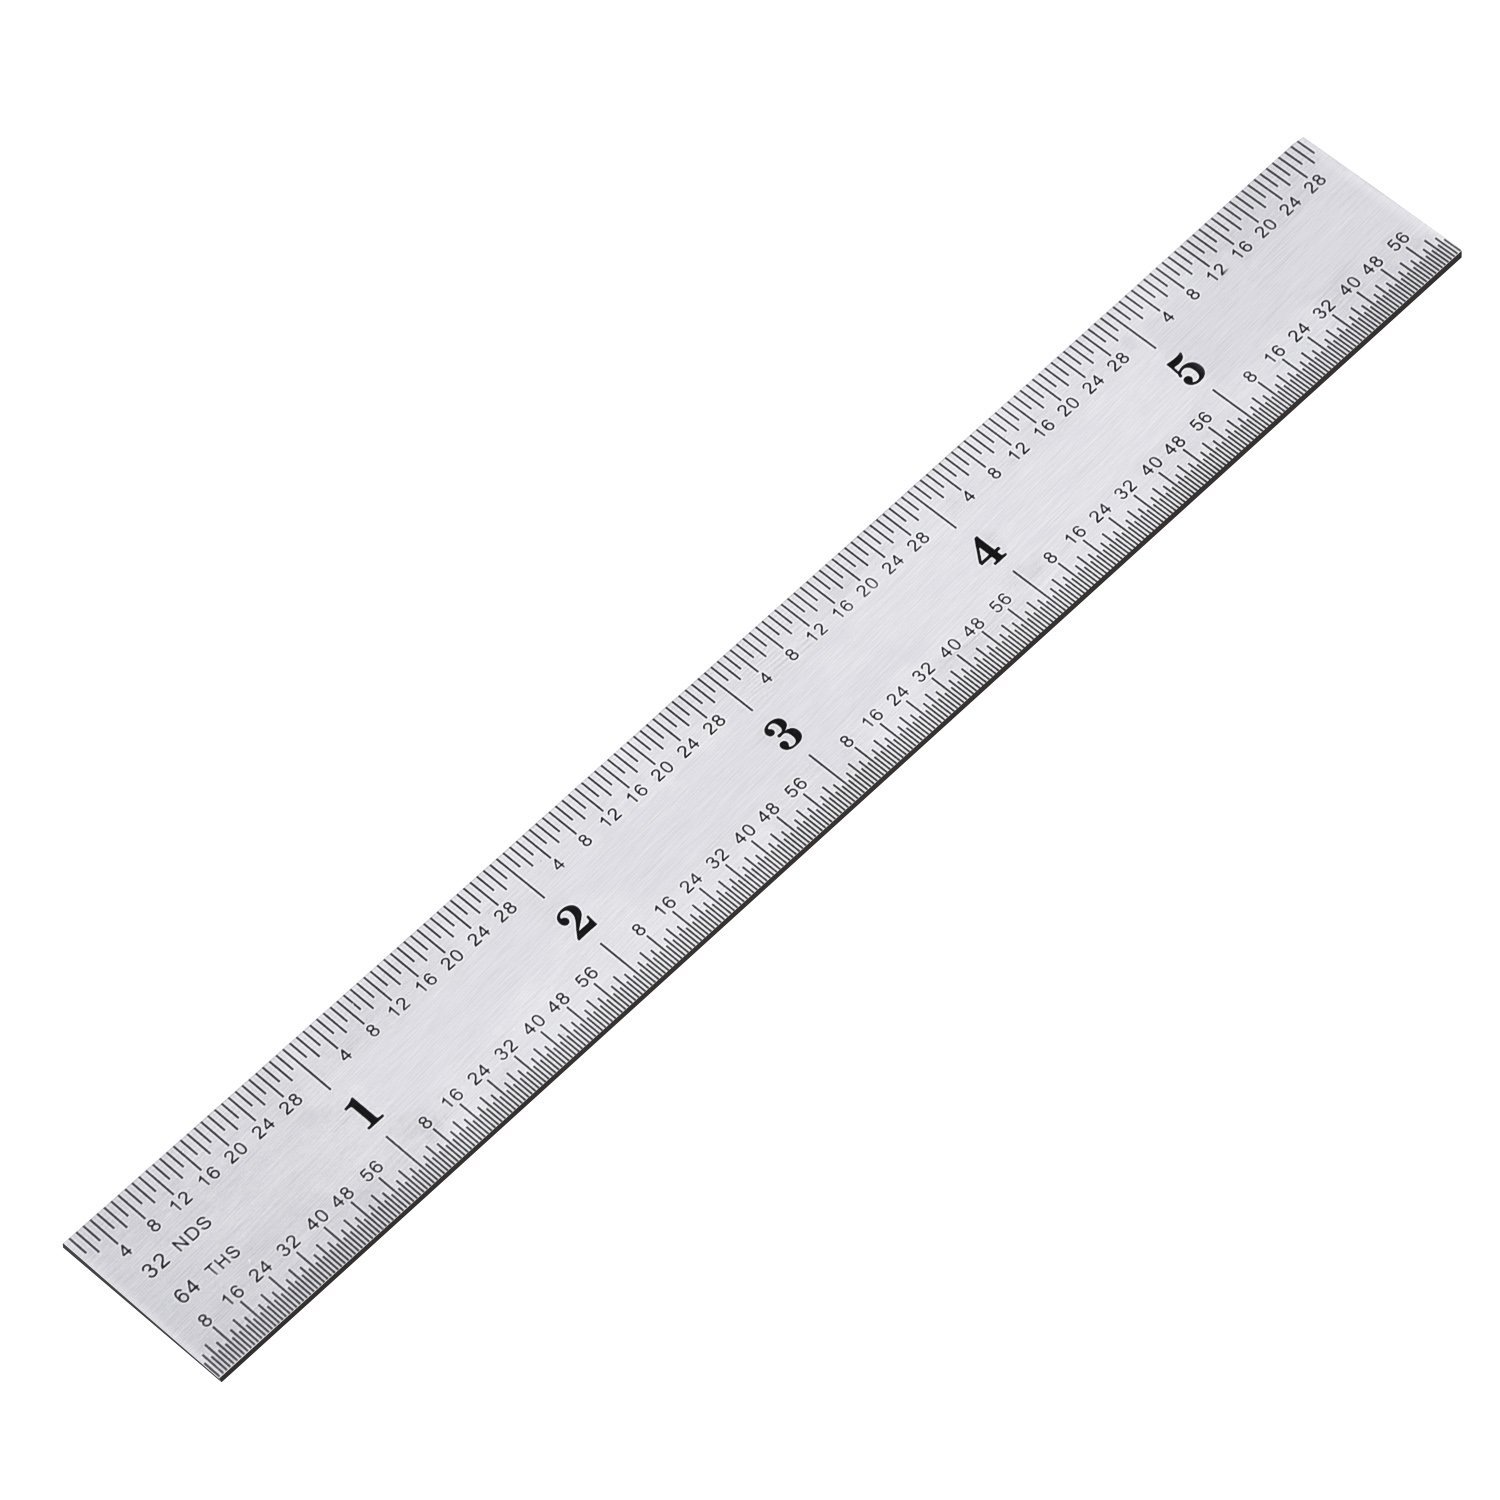 Stainless Steel Ruler 6 Inch for School, Office, Drawing ...